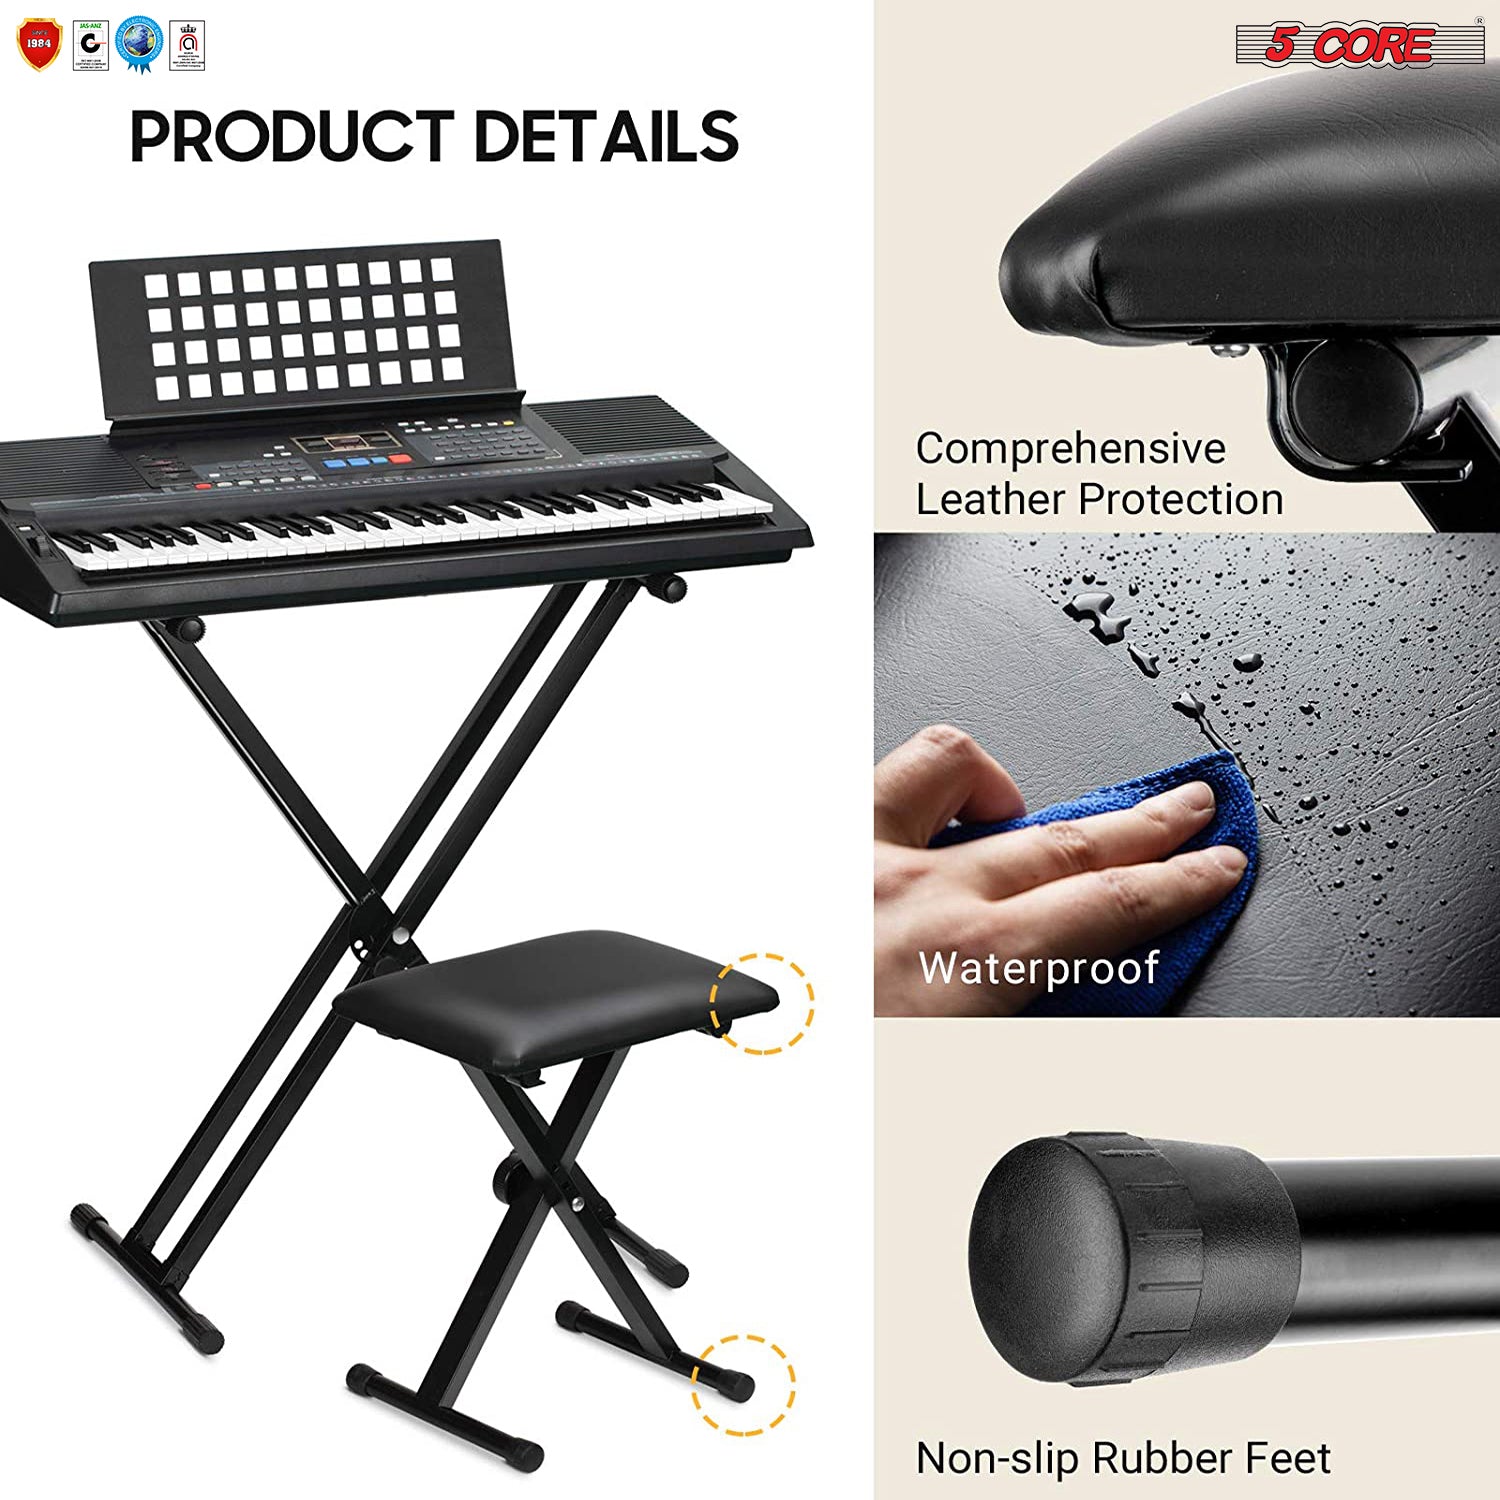 5 Core Adjustable Keyboard Bench 16.3 - 19.6 Inch X style Bench Piano Stool Chair Thick And Padded Comfortable Guitar Stools & Seats - KBB 02 BLK